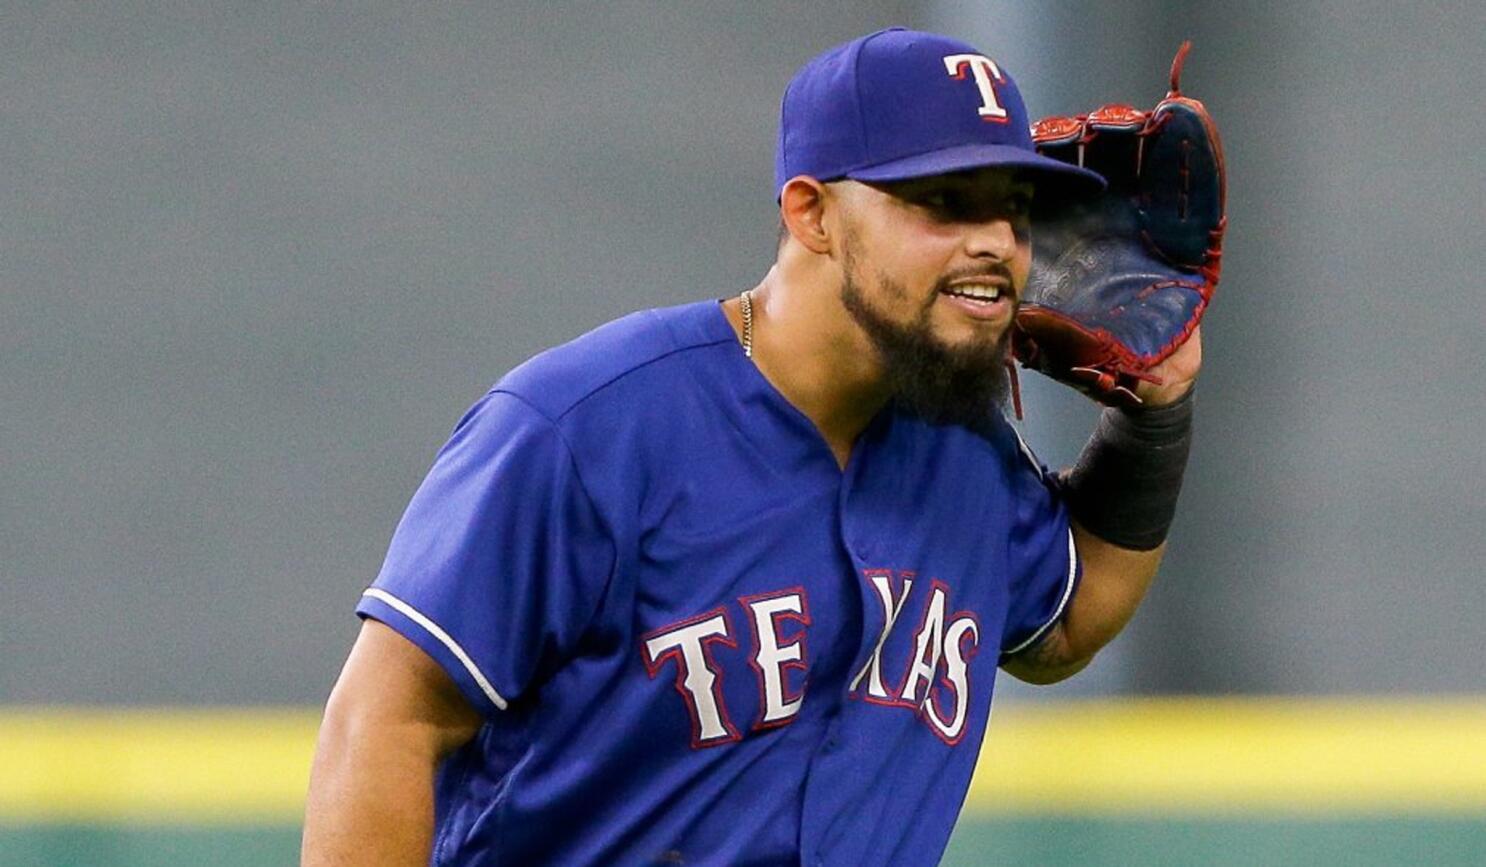 Rangers' Rougned Odor to have hearing Tuesday to appeal eight-game